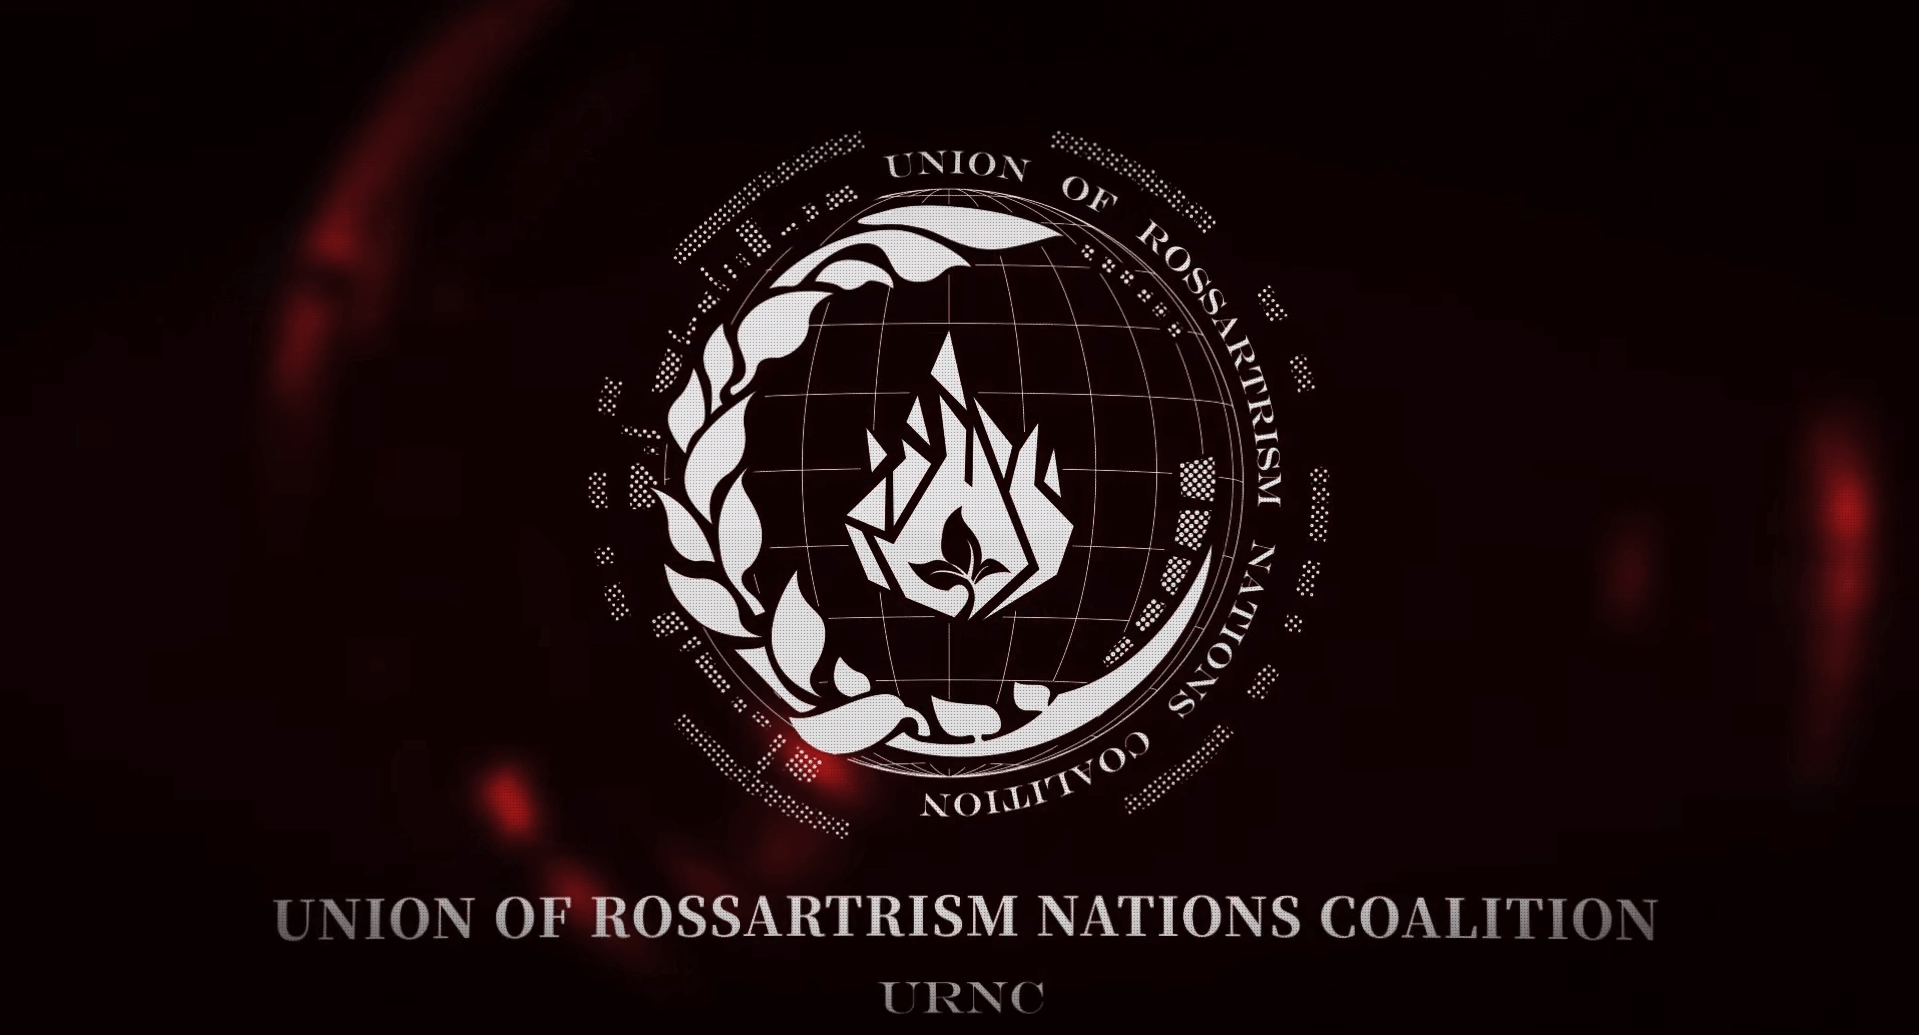 Symbol of the Union of Rossartrism Nations Coalition, established in late 2064.